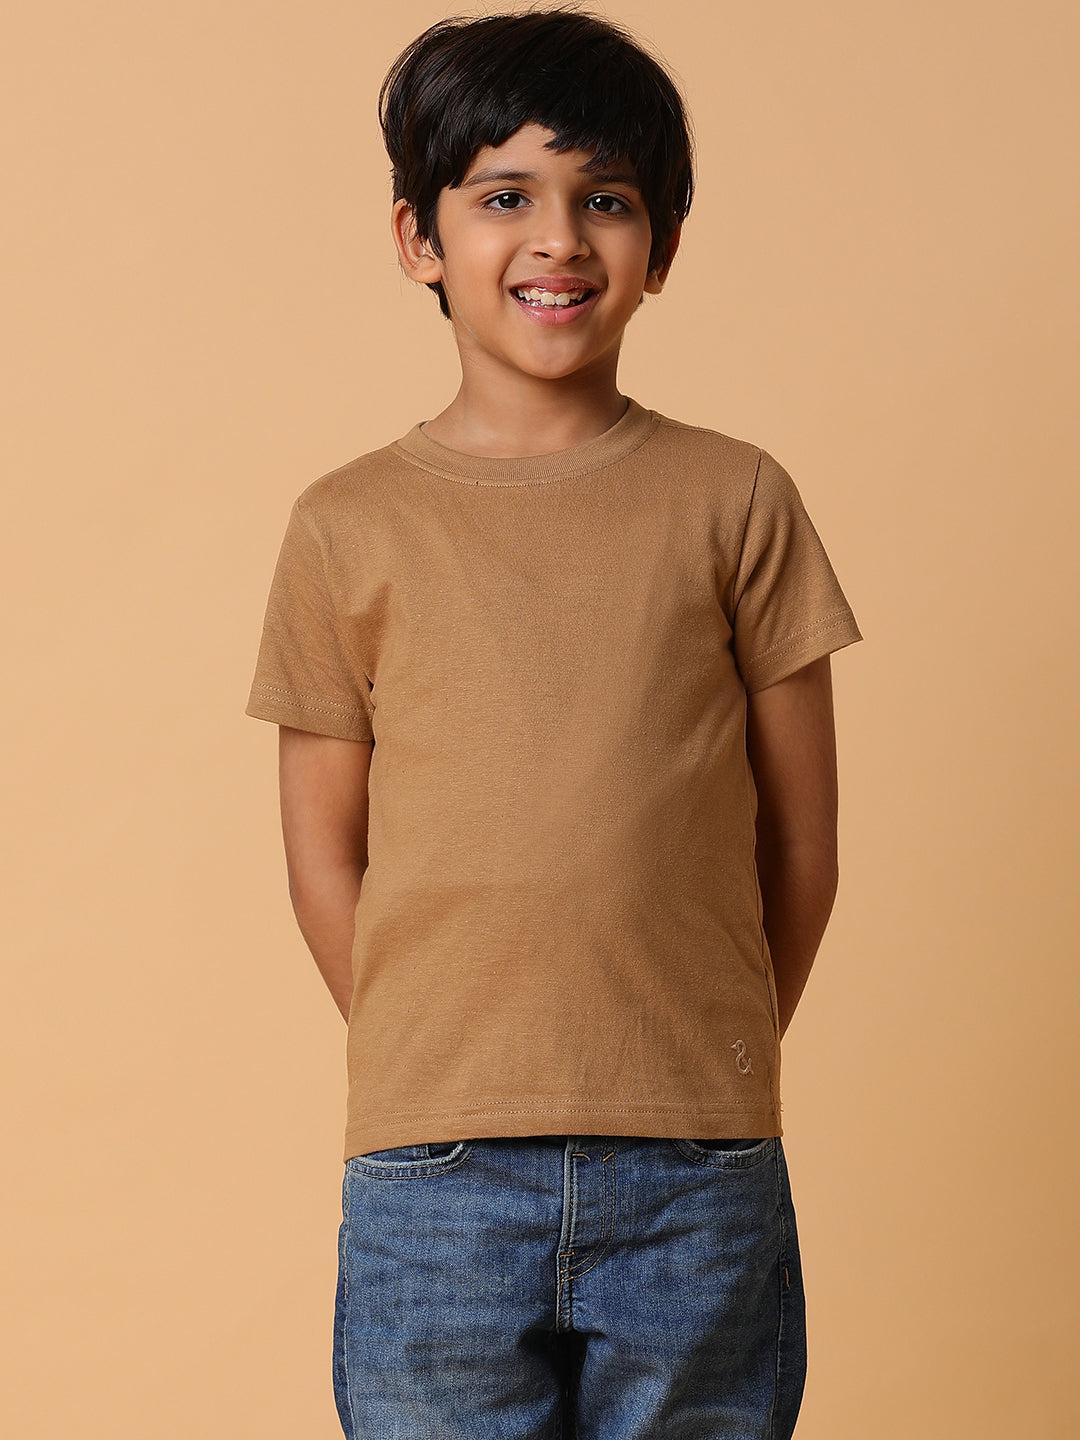 boys-brown-solid-cotton-t-shirt